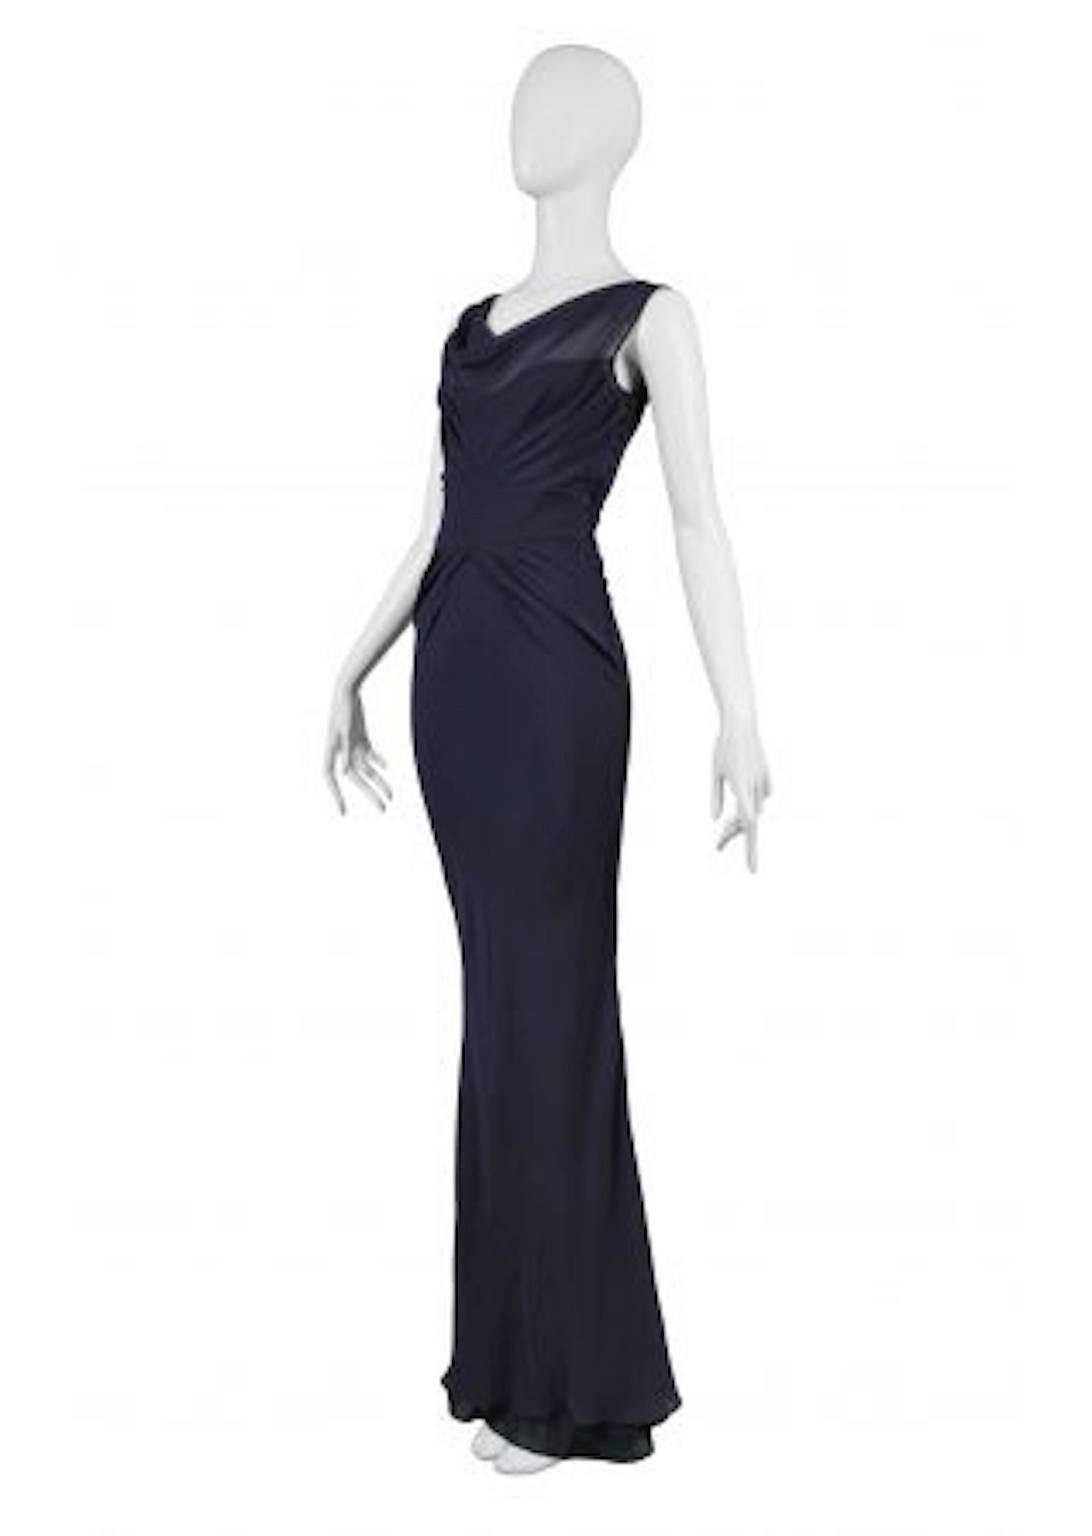 John Galliano Navy Chiffon Gown
Please inquire for other photographs.